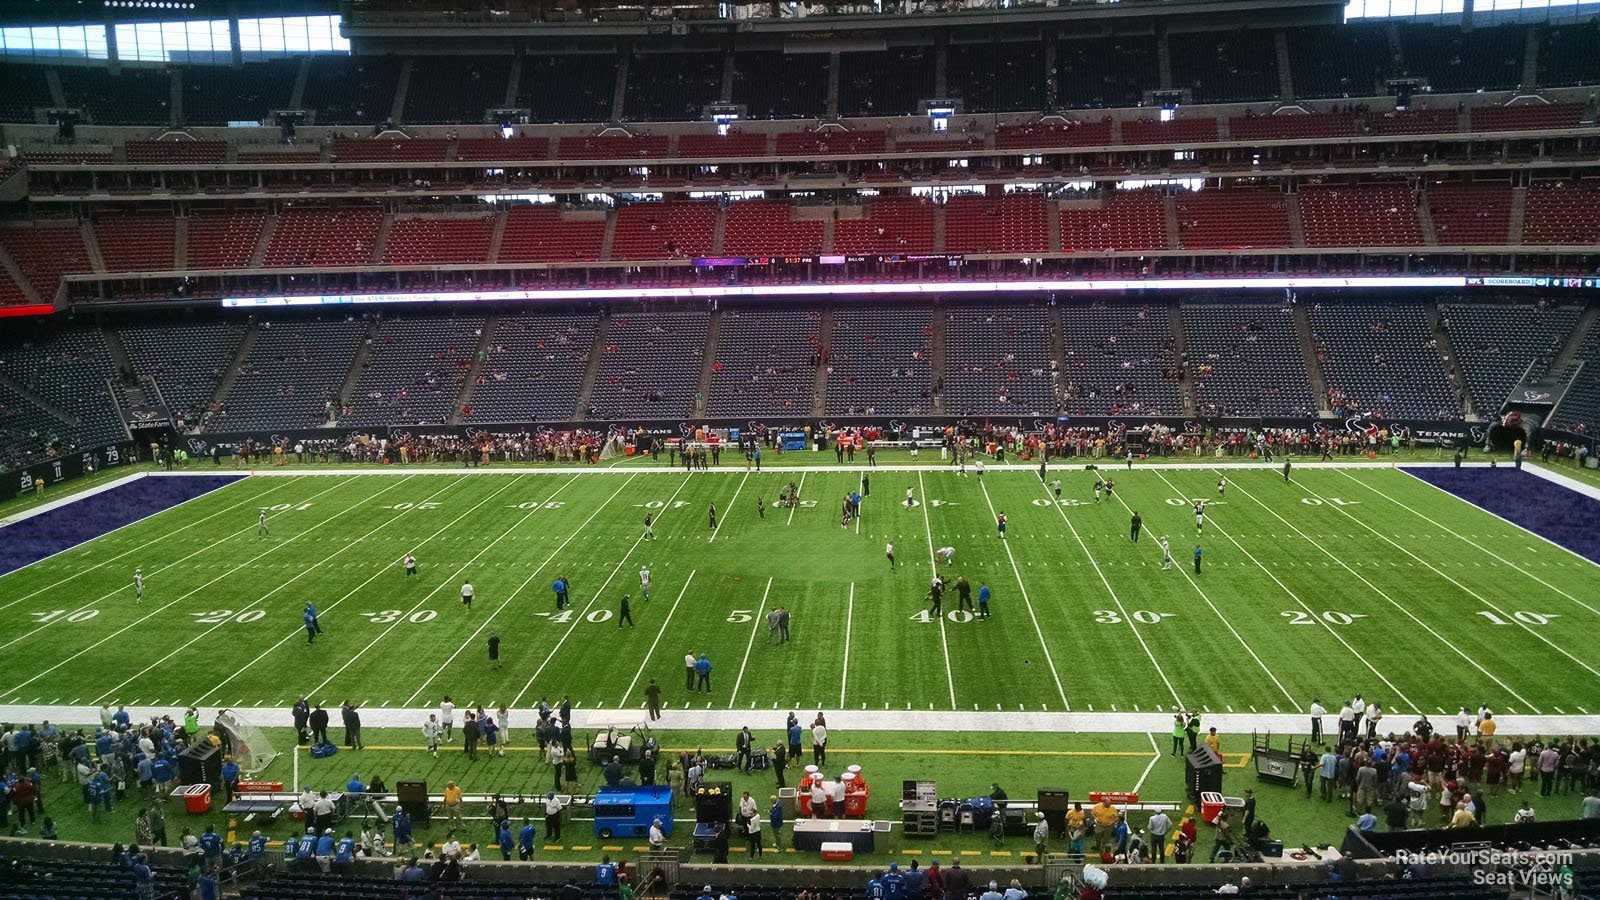 section 337, row l seat view  for football - nrg stadium